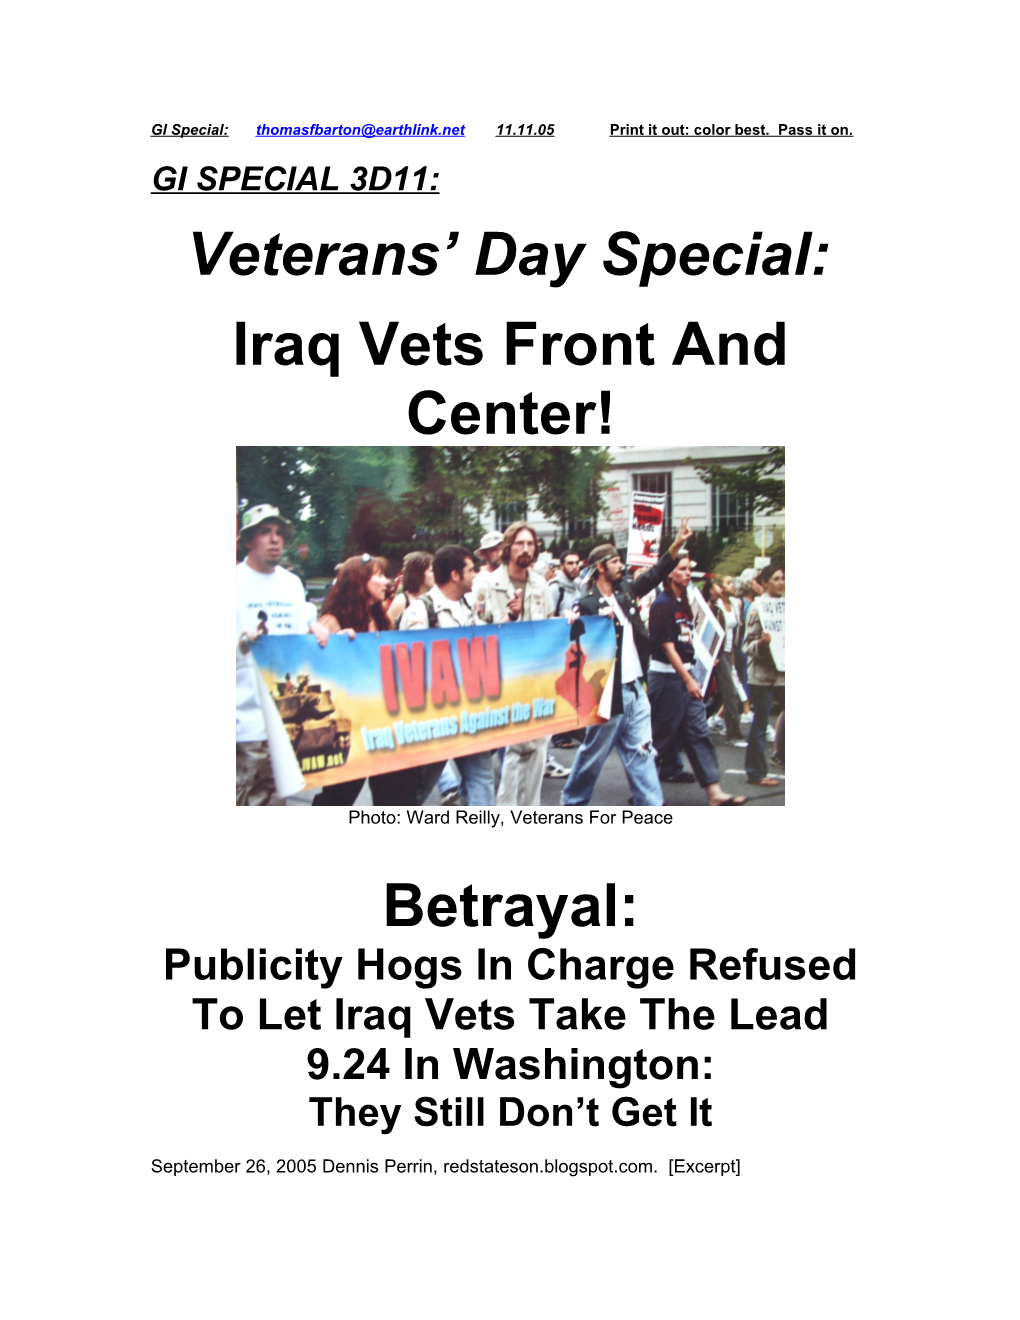 Iraq Vets Front and Center!